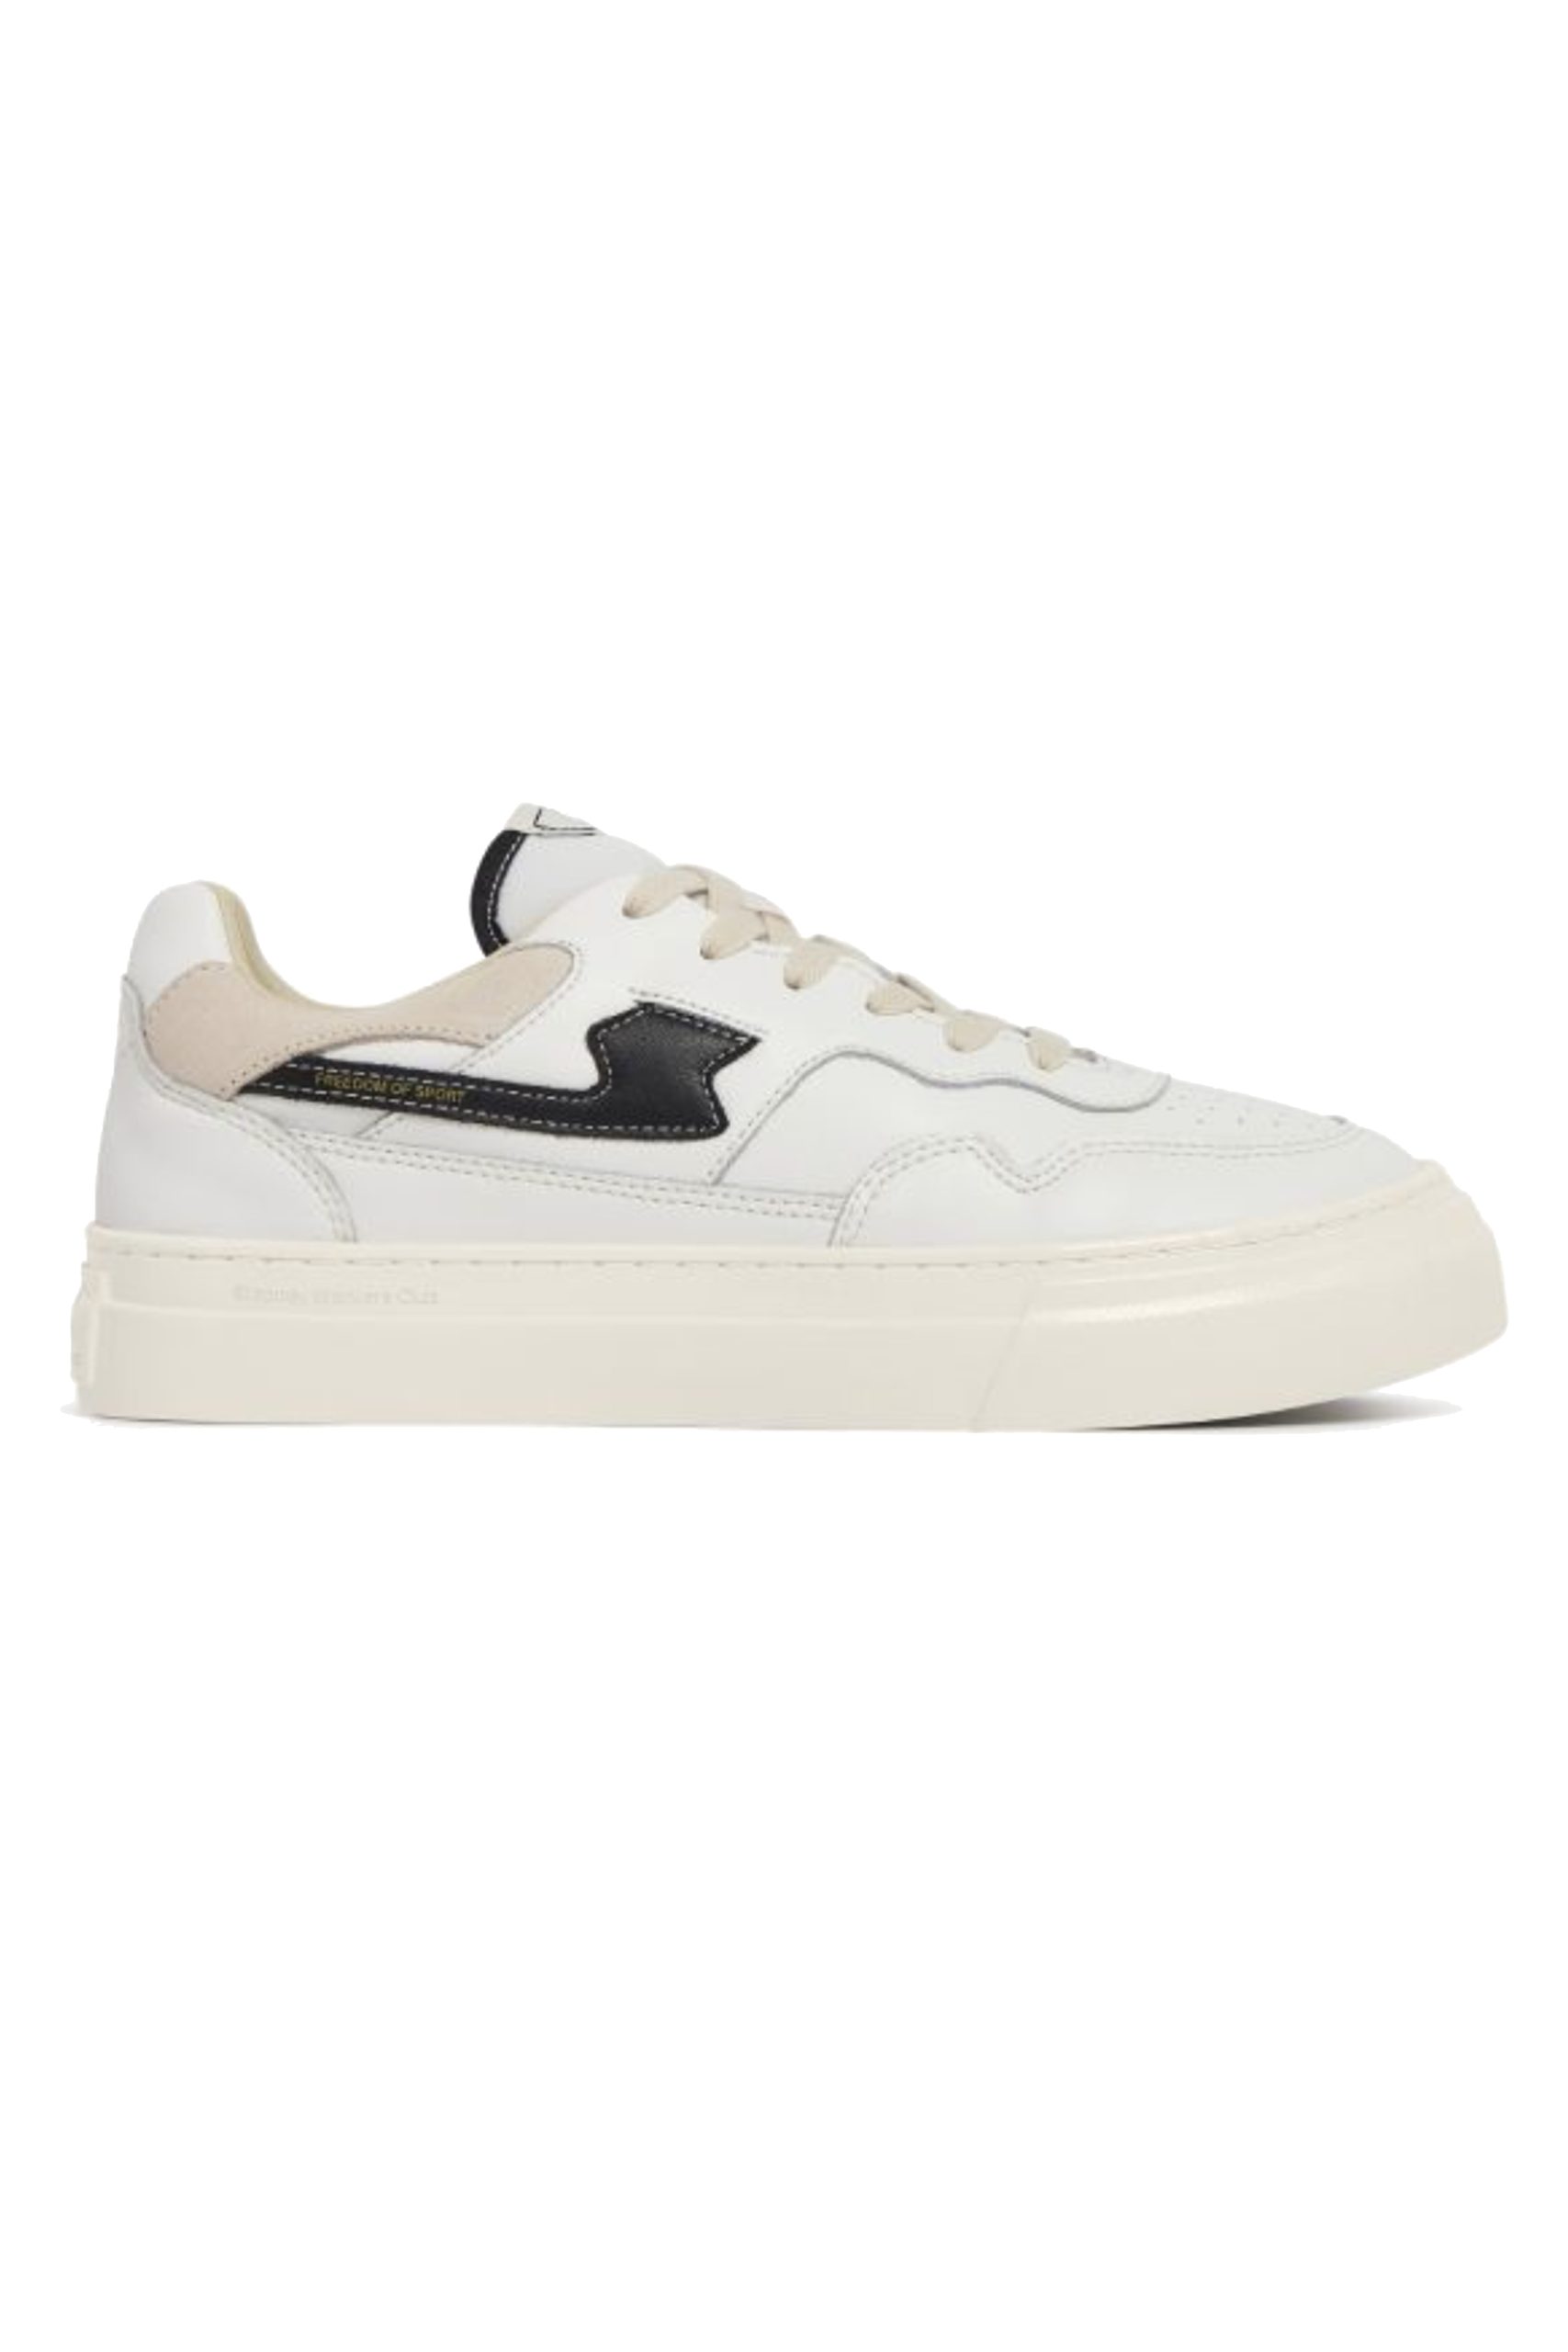 SWC Sneakers PEARL S-STRIKE Leather white black